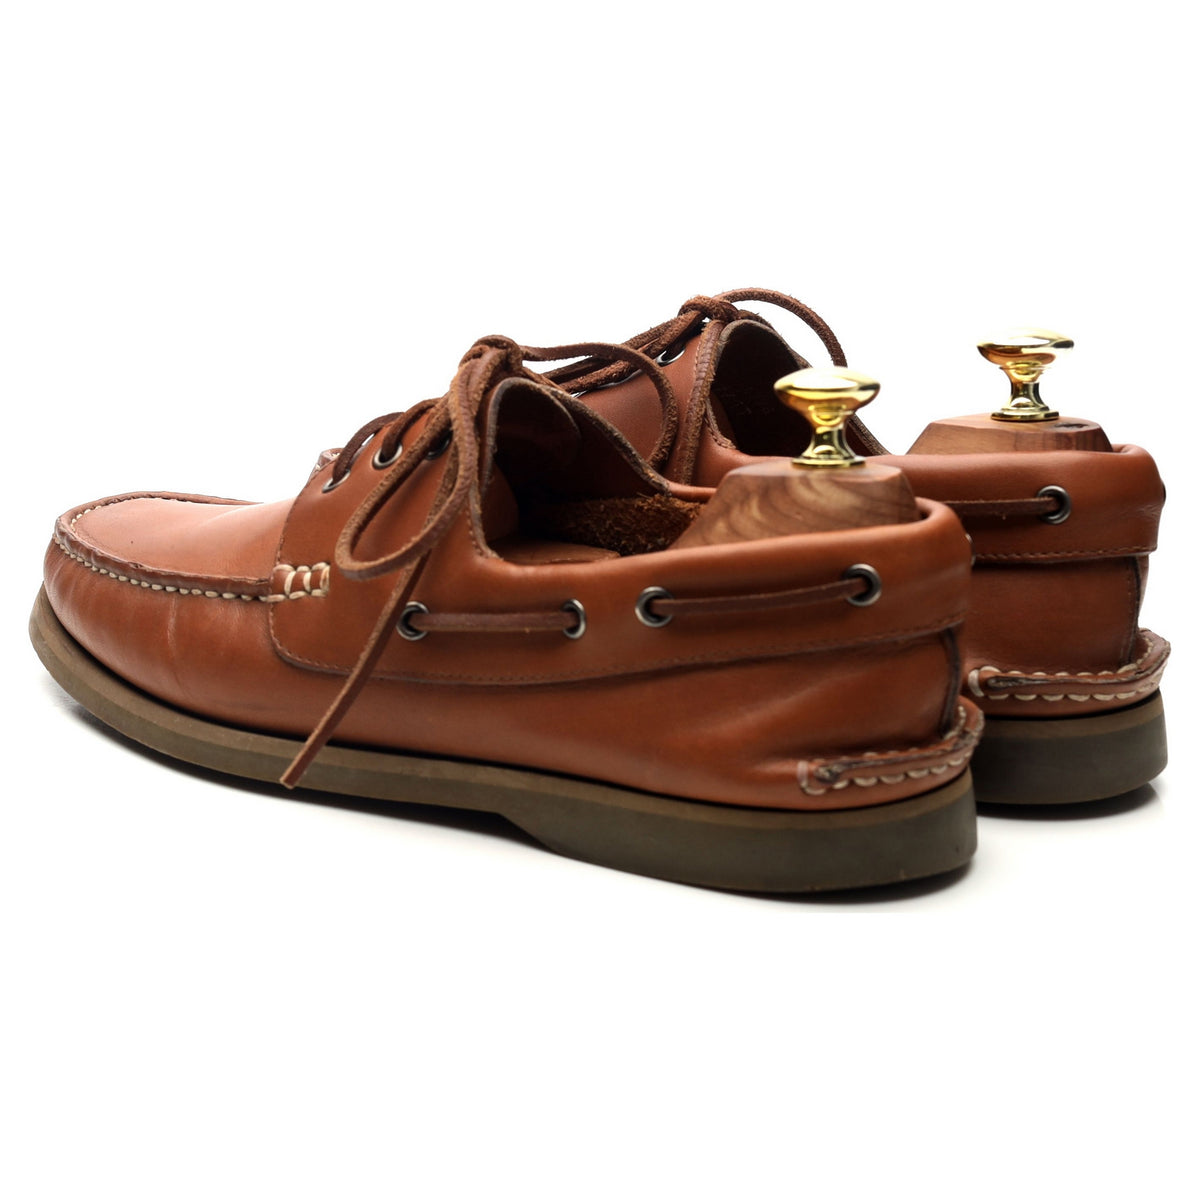 Brown Leather Boat Shoes UK 7.5